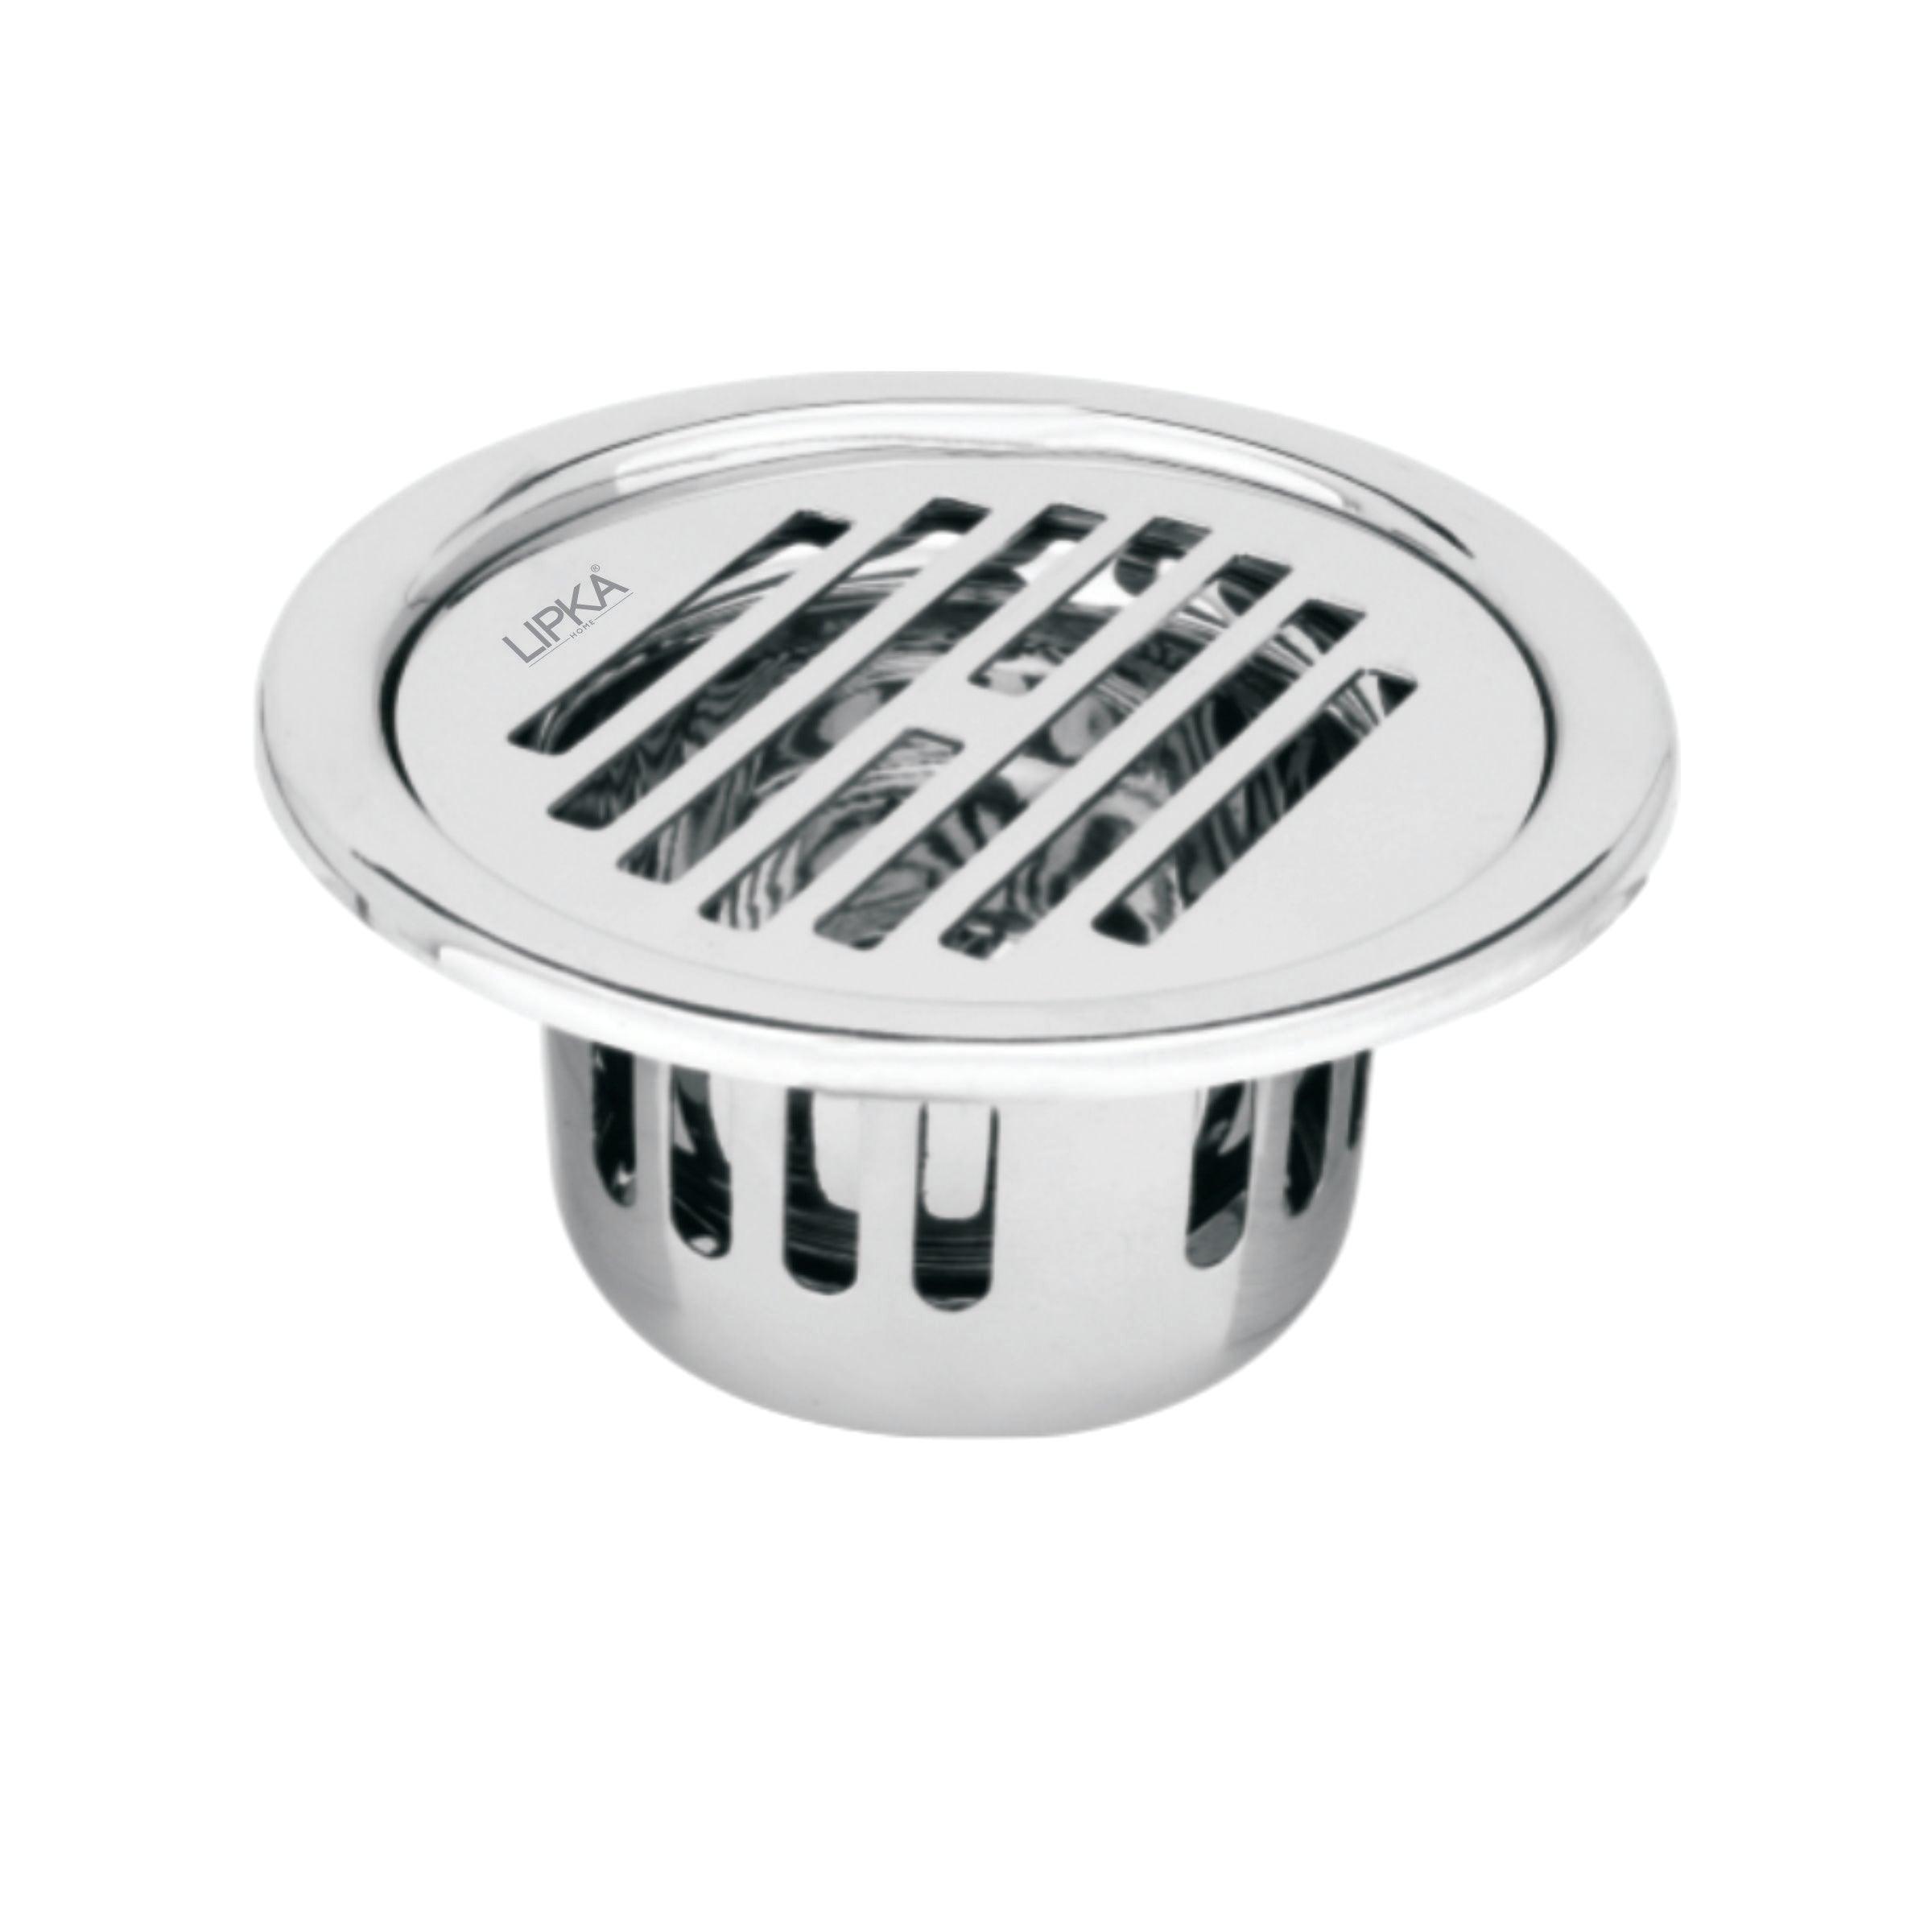 Golden Classic Jali Round Floor Drain (5 Inches) with Cockroach Trap